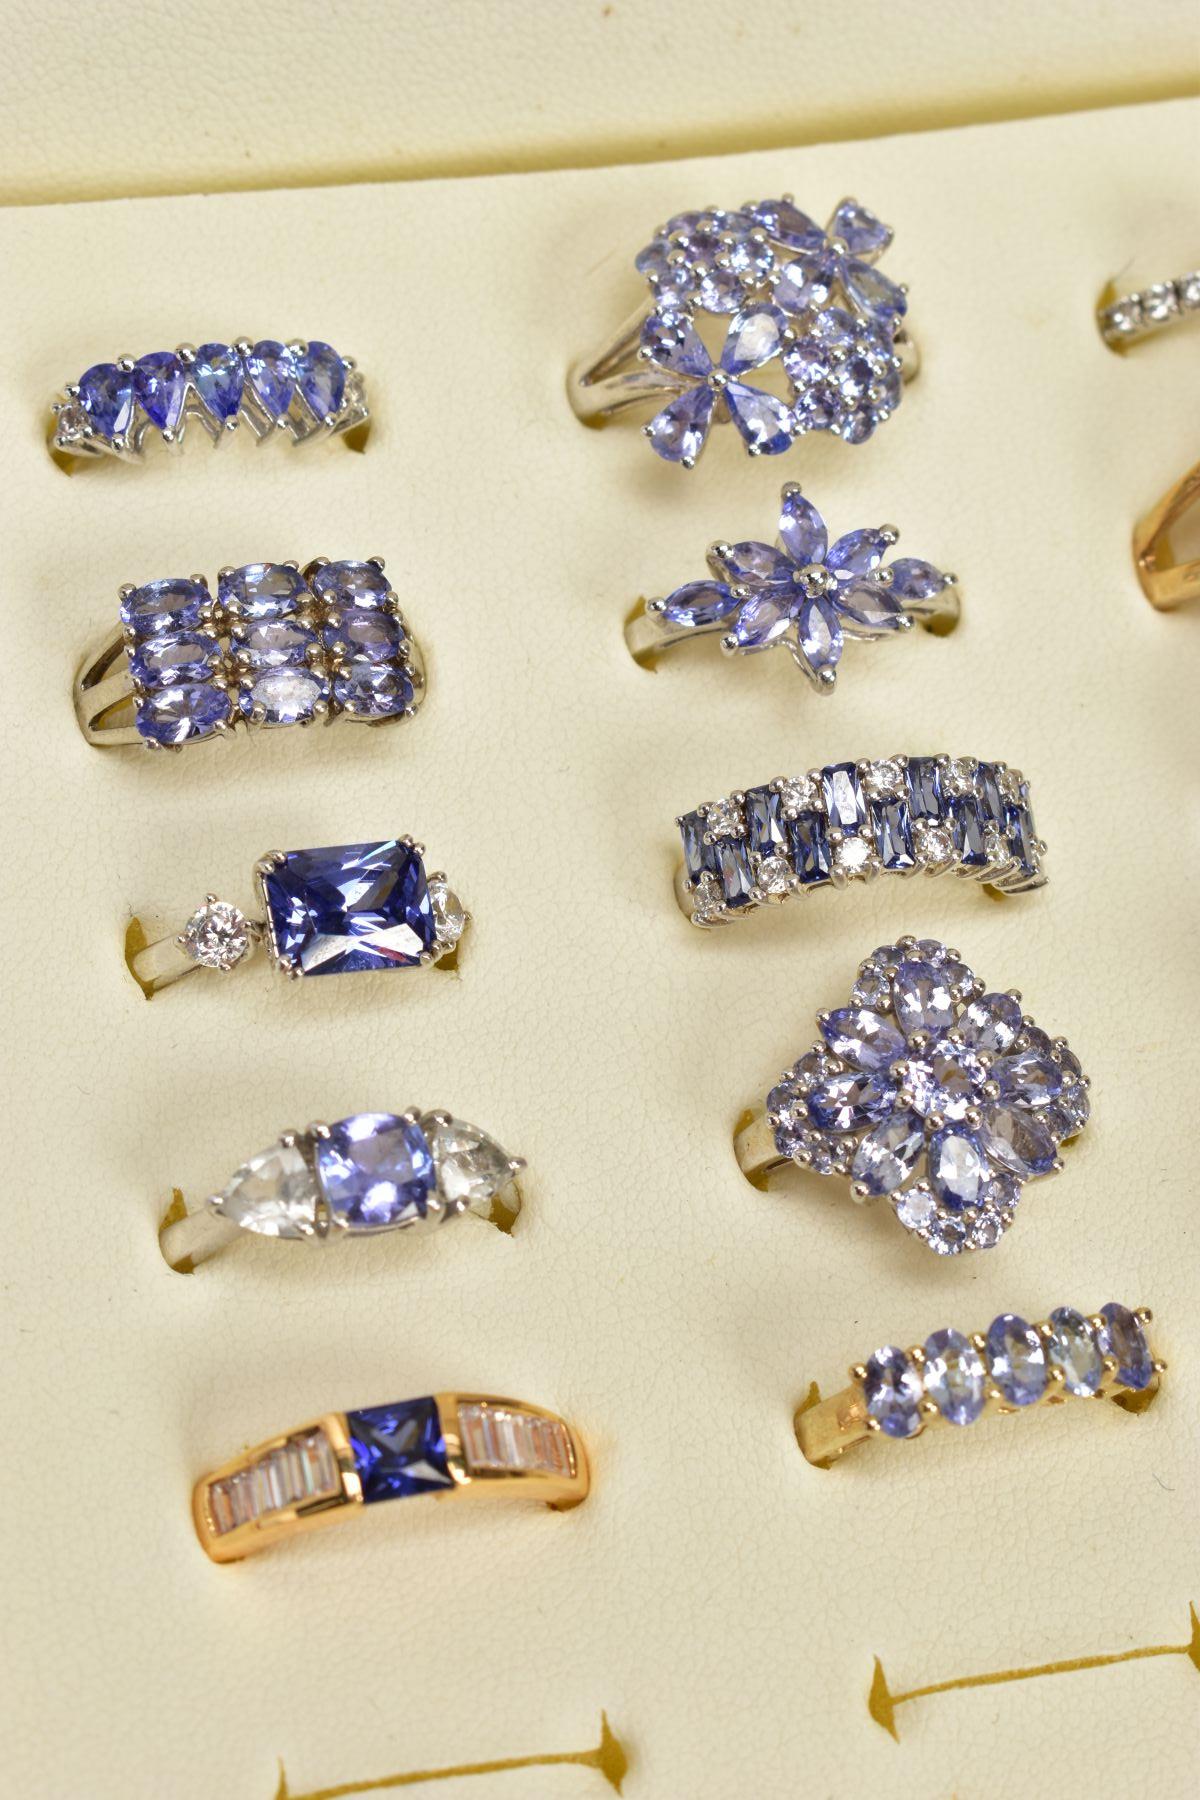 SEVENTEEN GEM SET RINGS AND A RING BOX, most set with vary cut tanzanite's, to include clusters, - Image 3 of 4